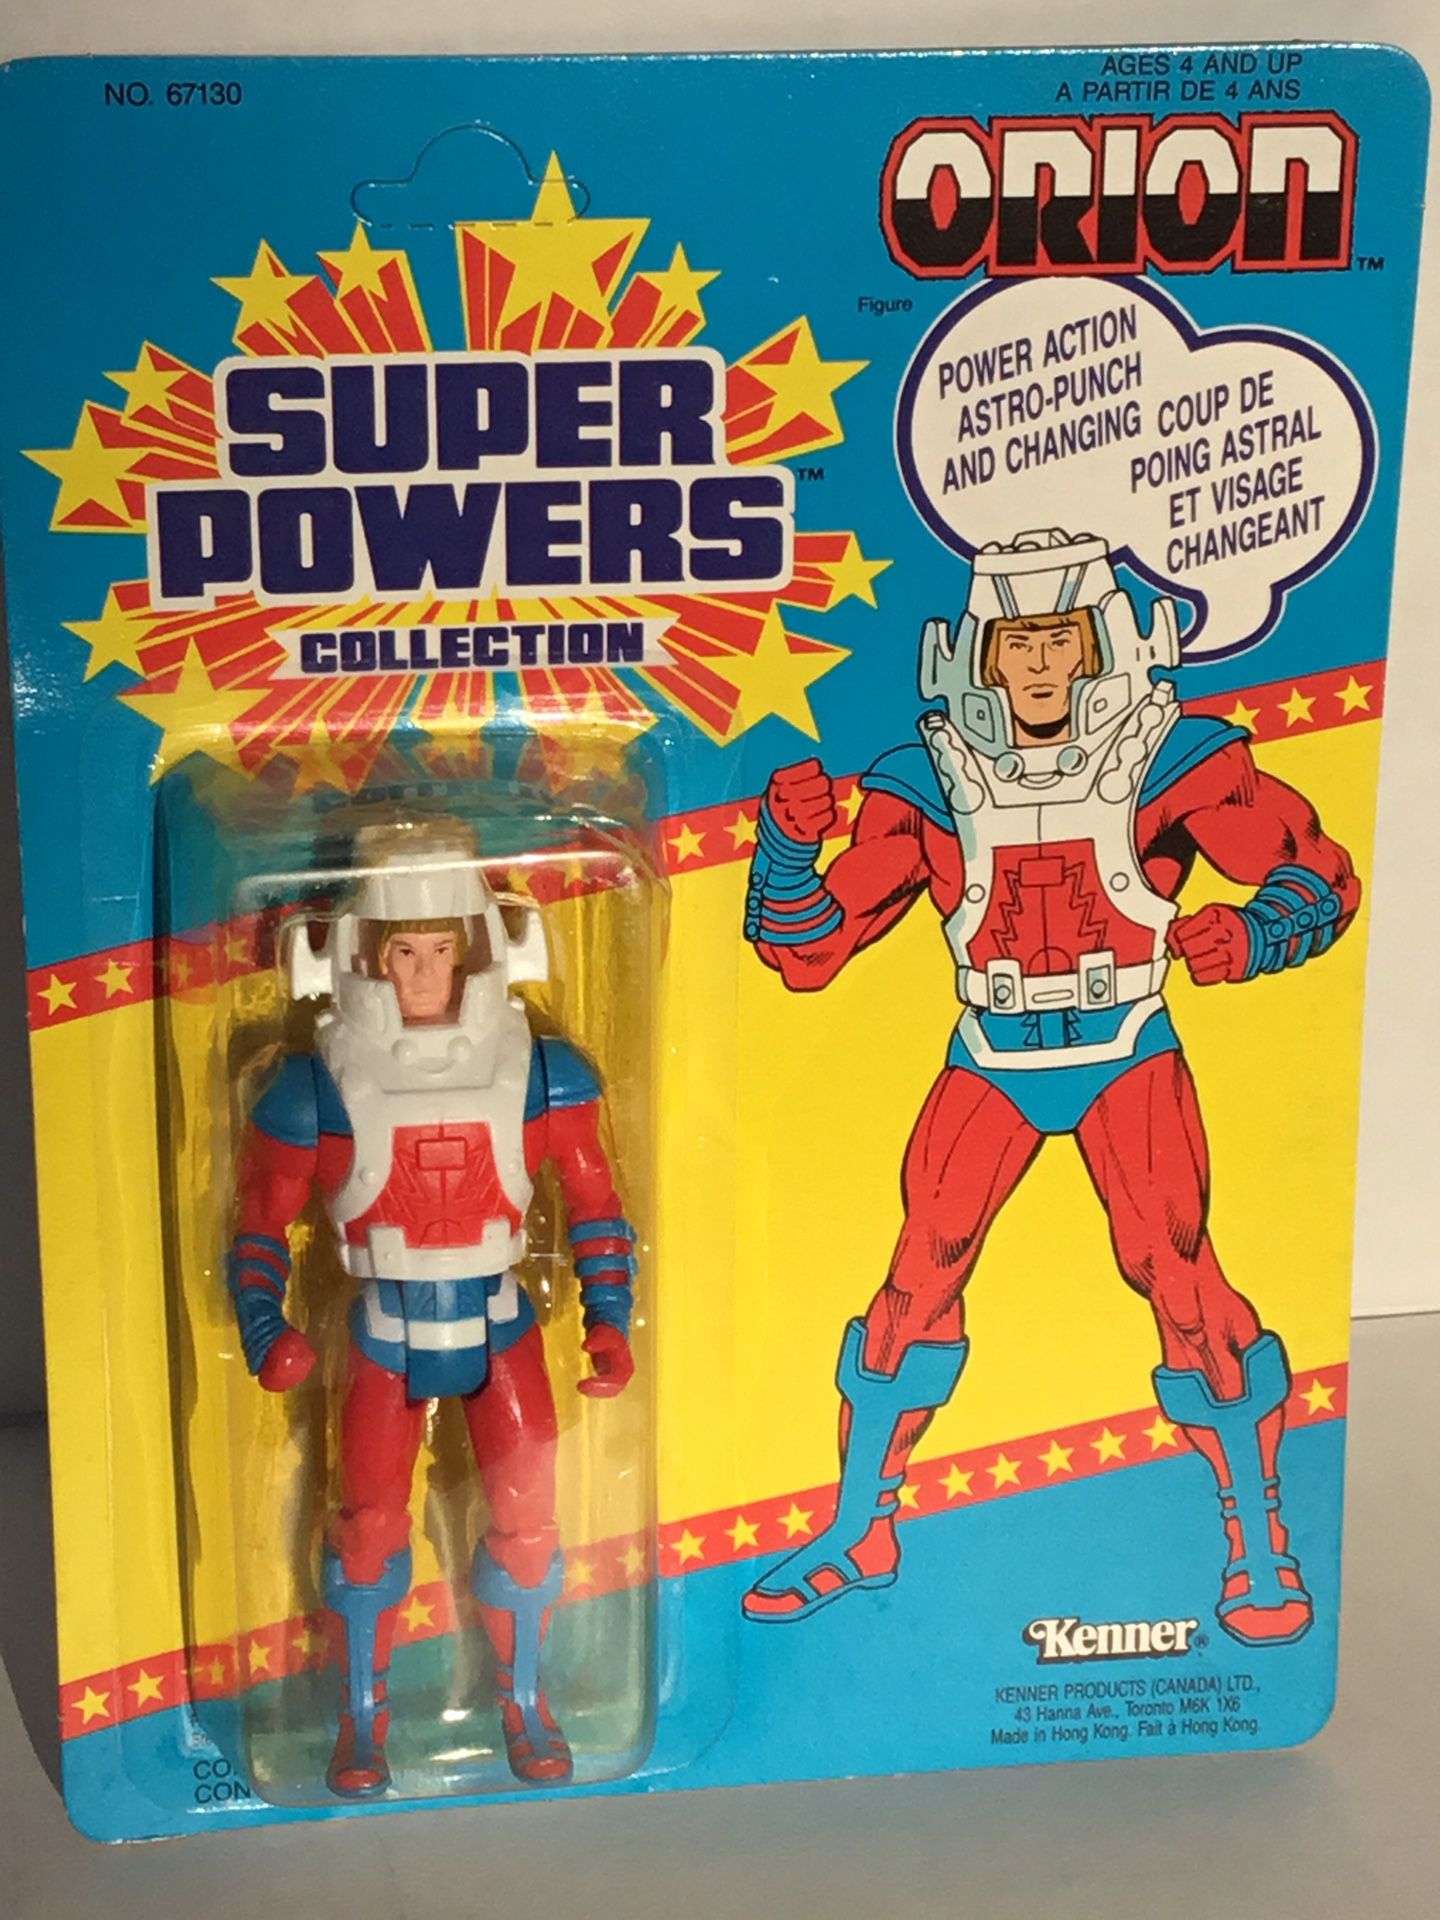 Vintage RARE CANADIAN BACK CARD OF “ORION” SUPERPOWERS ACTION FIGURE MOC